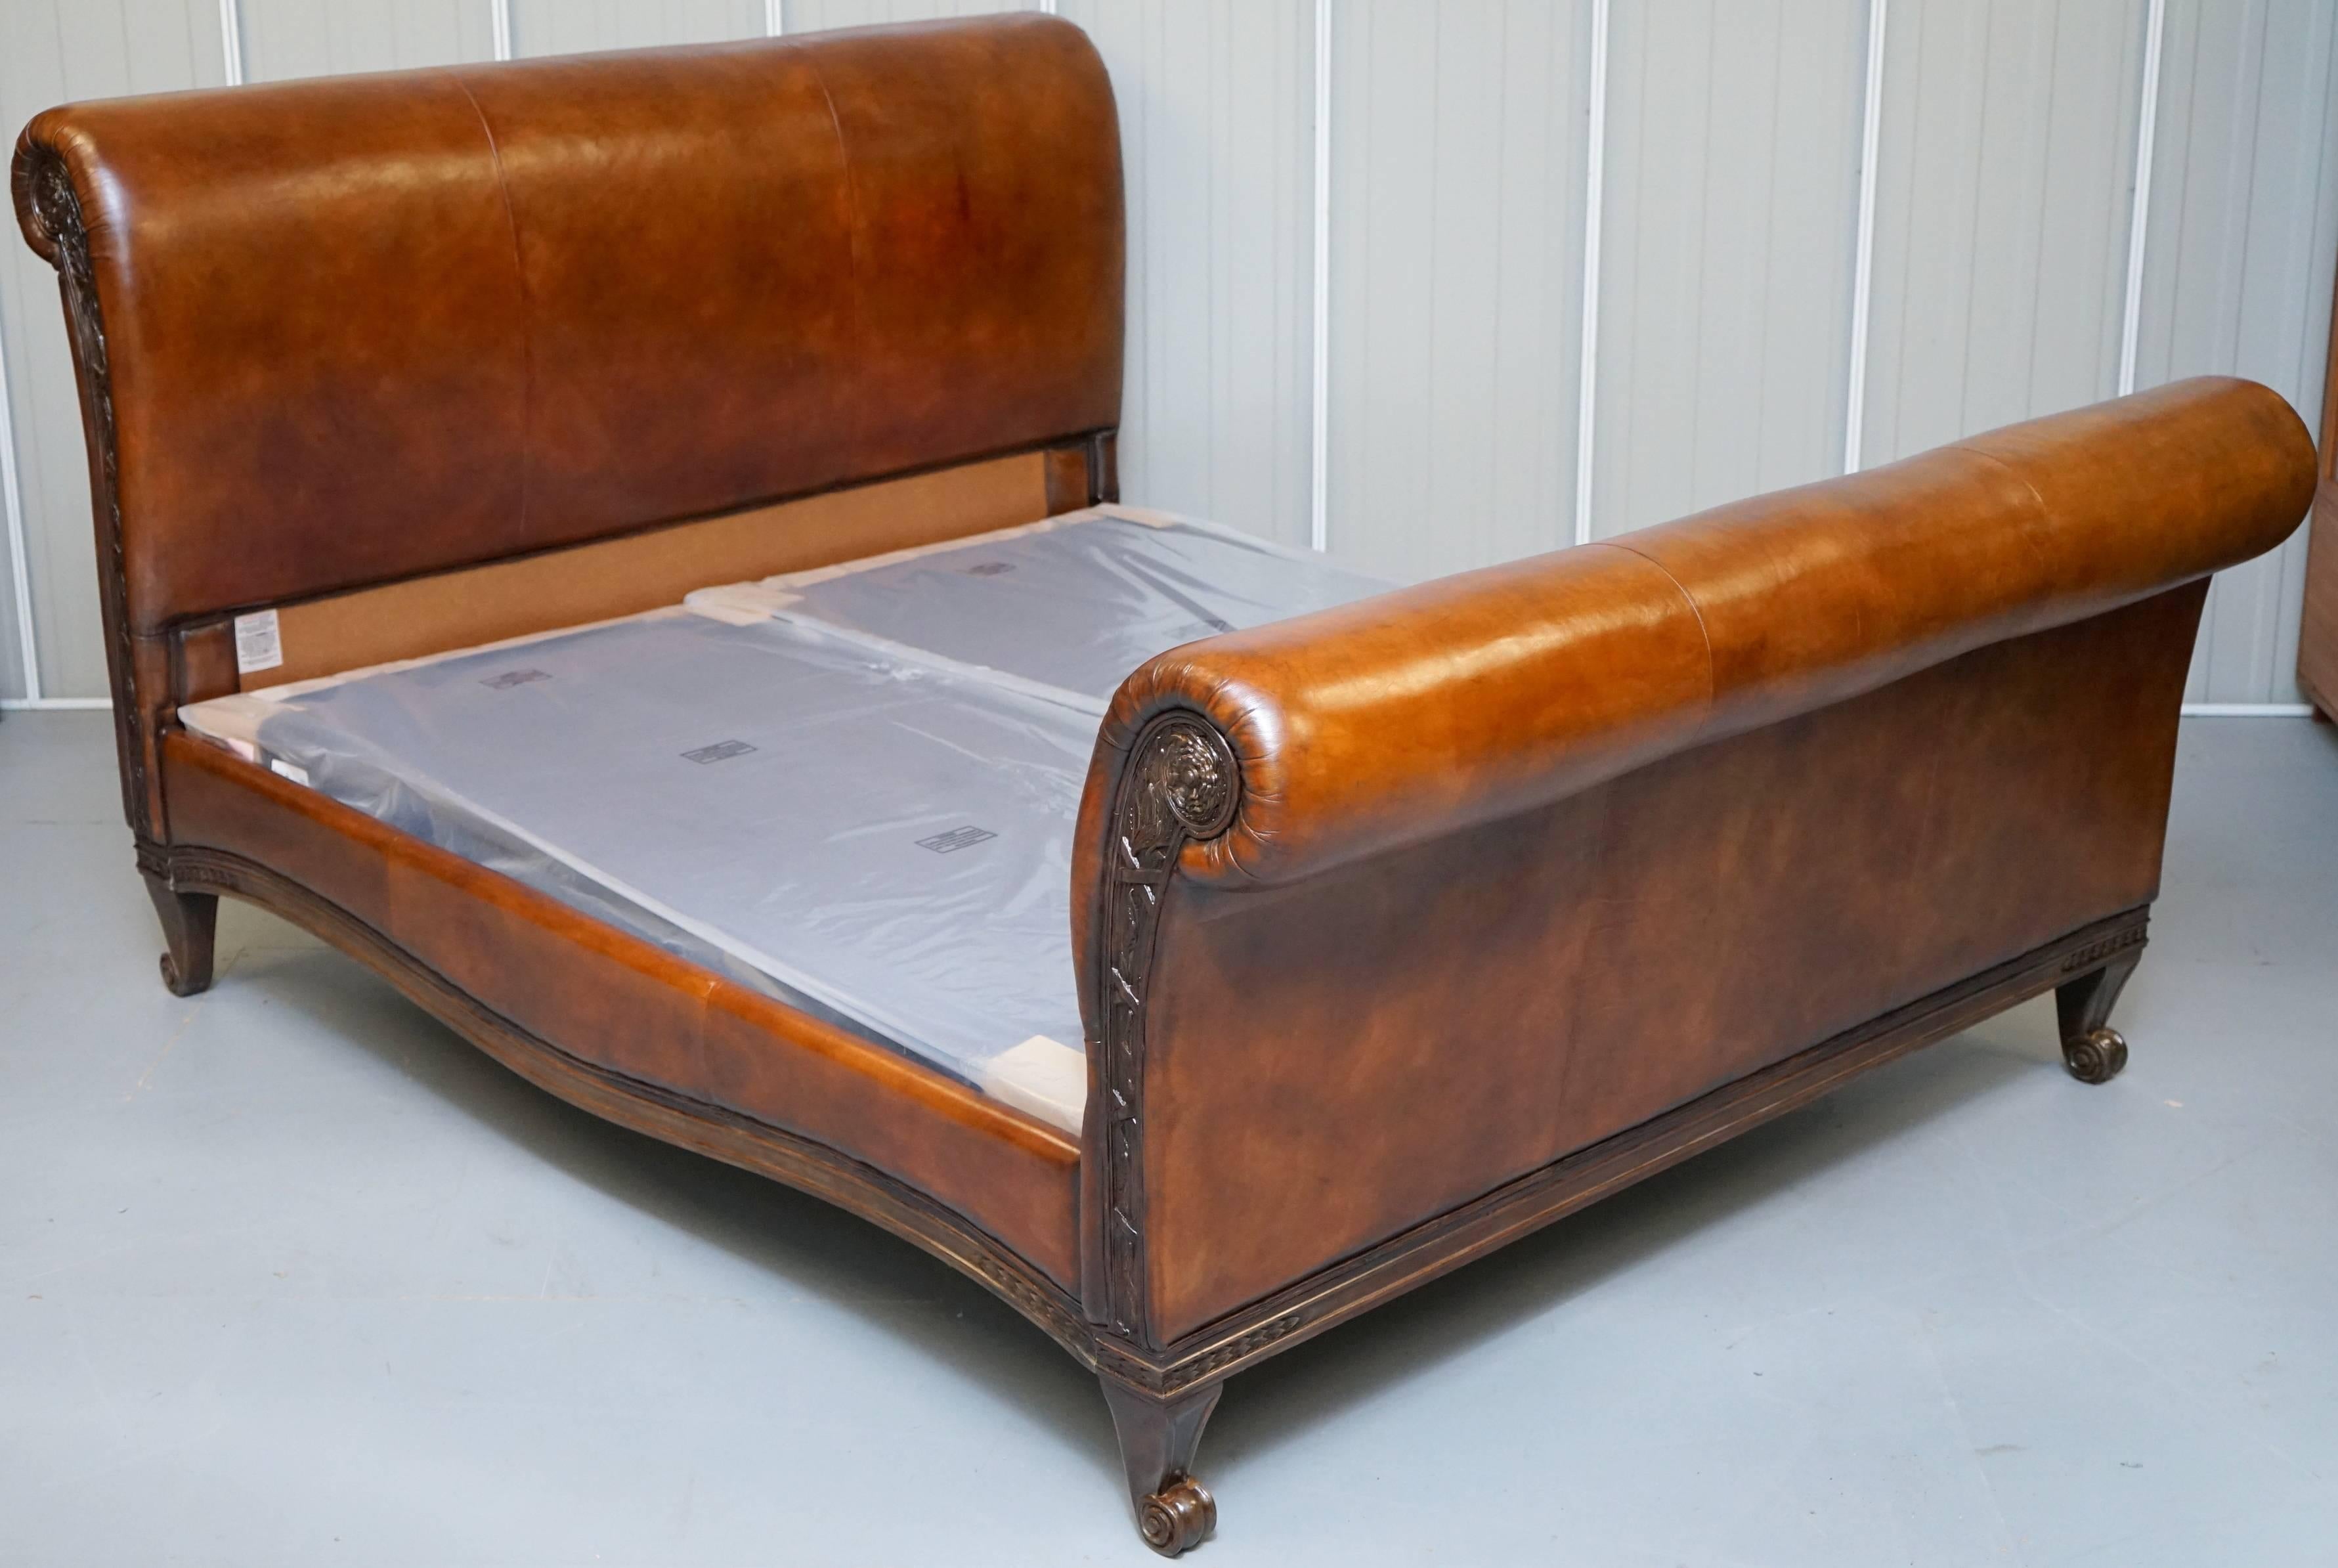 We are delighted to offer for sale this new And So To Bed Bonaparte sleigh brown leather super king-size bed

This bed was custom-made to order for an exhibition, it was ordered with a plain upholstered leather head and base board as apposed to